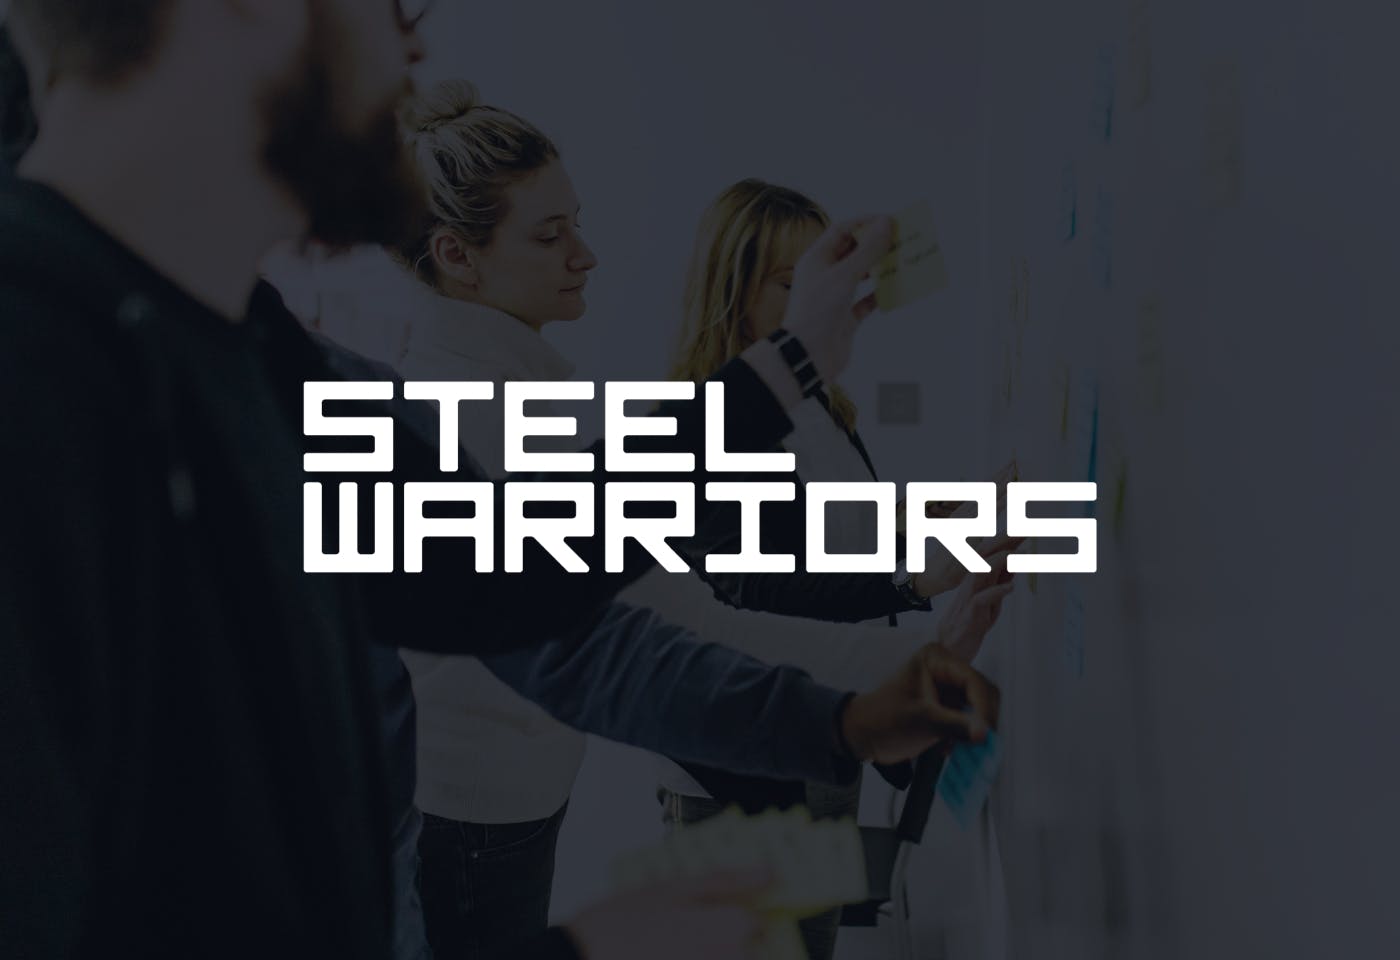 The Steel Warriors logo on a dark background in front of an image of people conducting a whiteboard exercise.